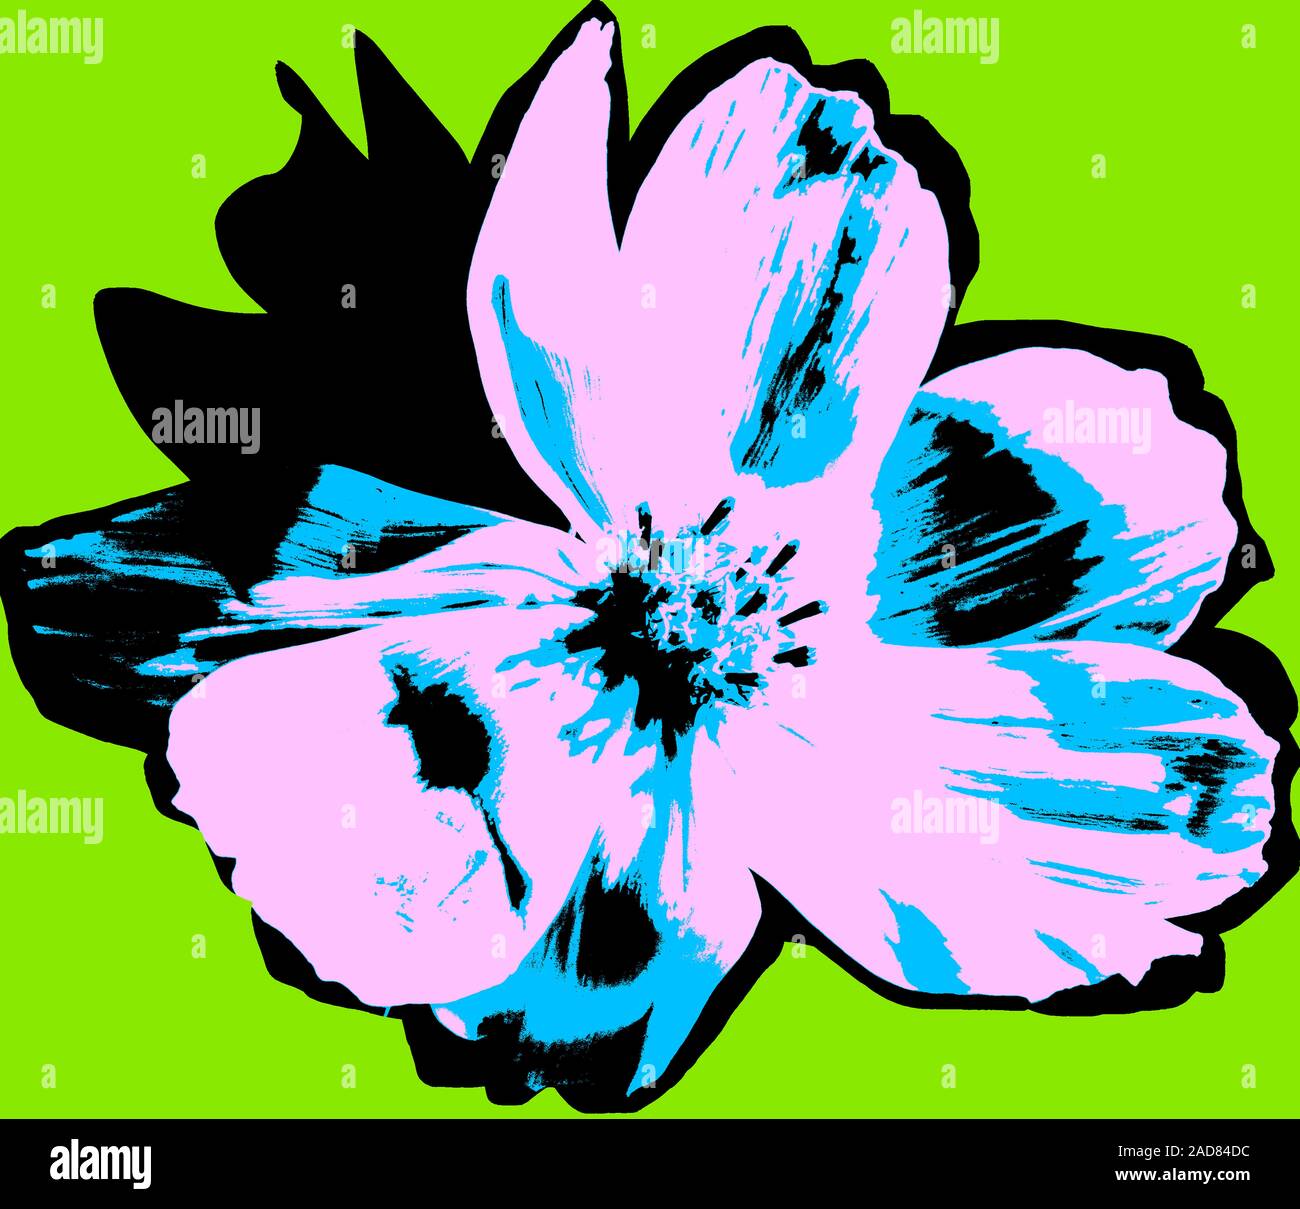 Flower picture over green background in pop art style Stock Photo - Alamy